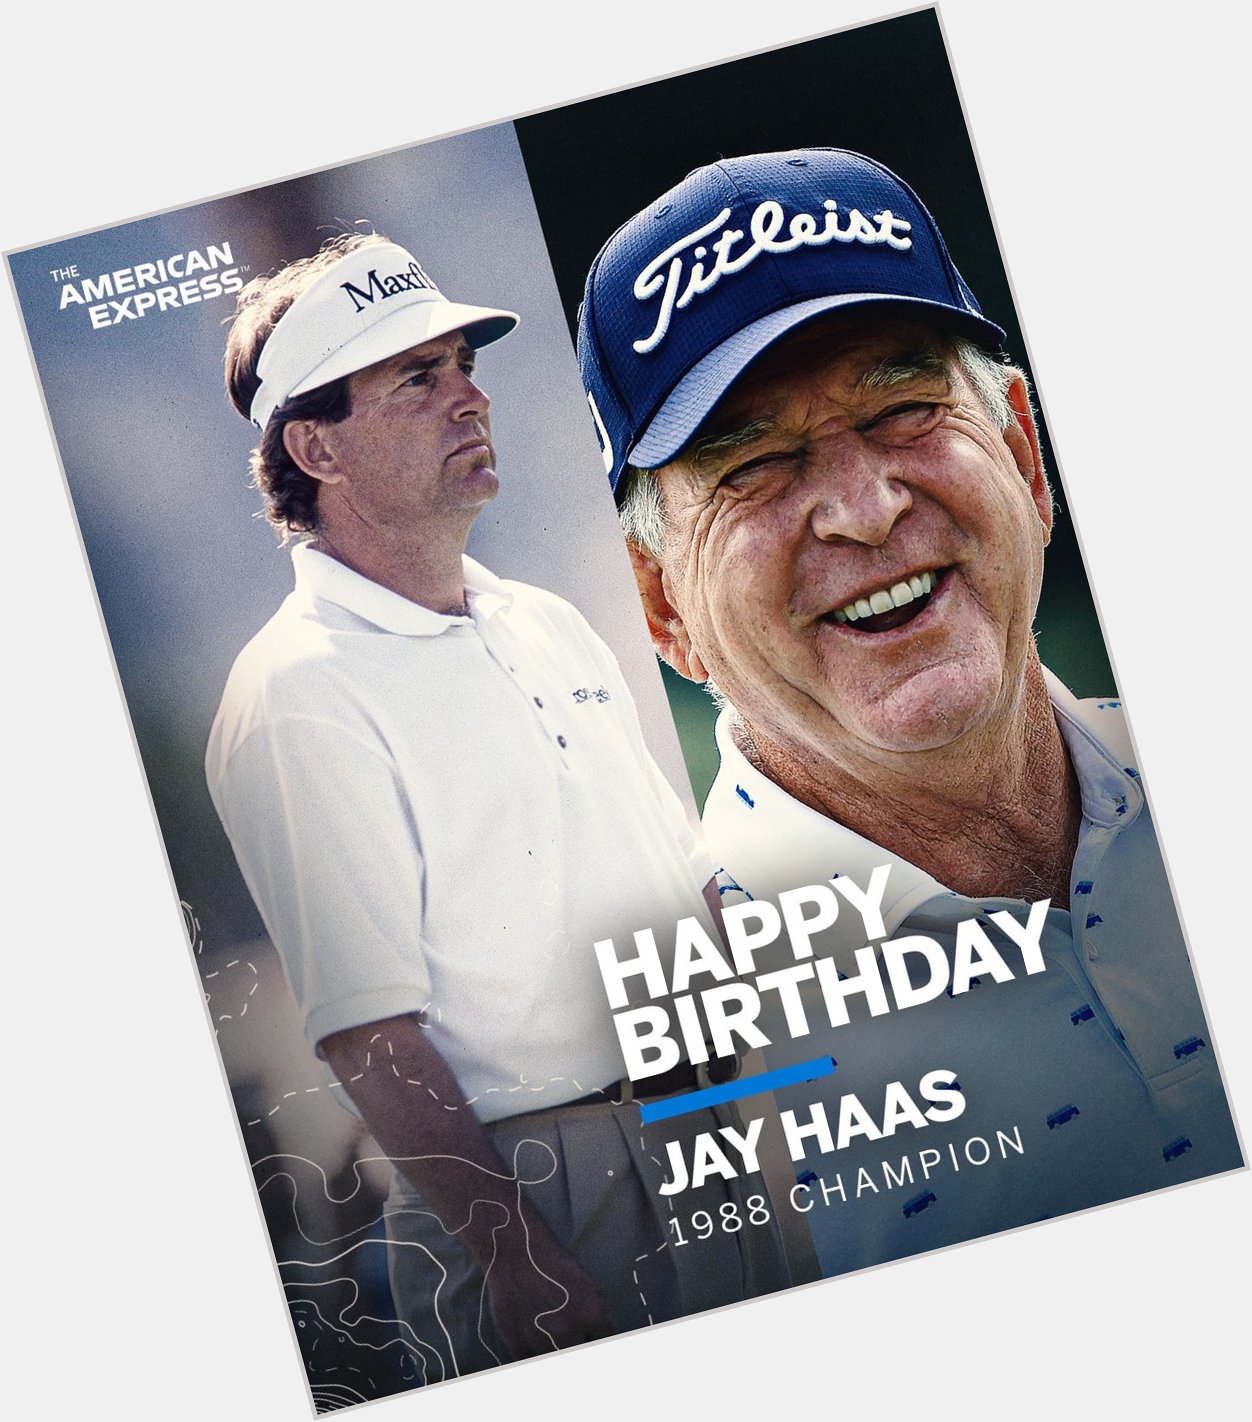 Happy birthday to our 1988 Champion, Jay Haas 